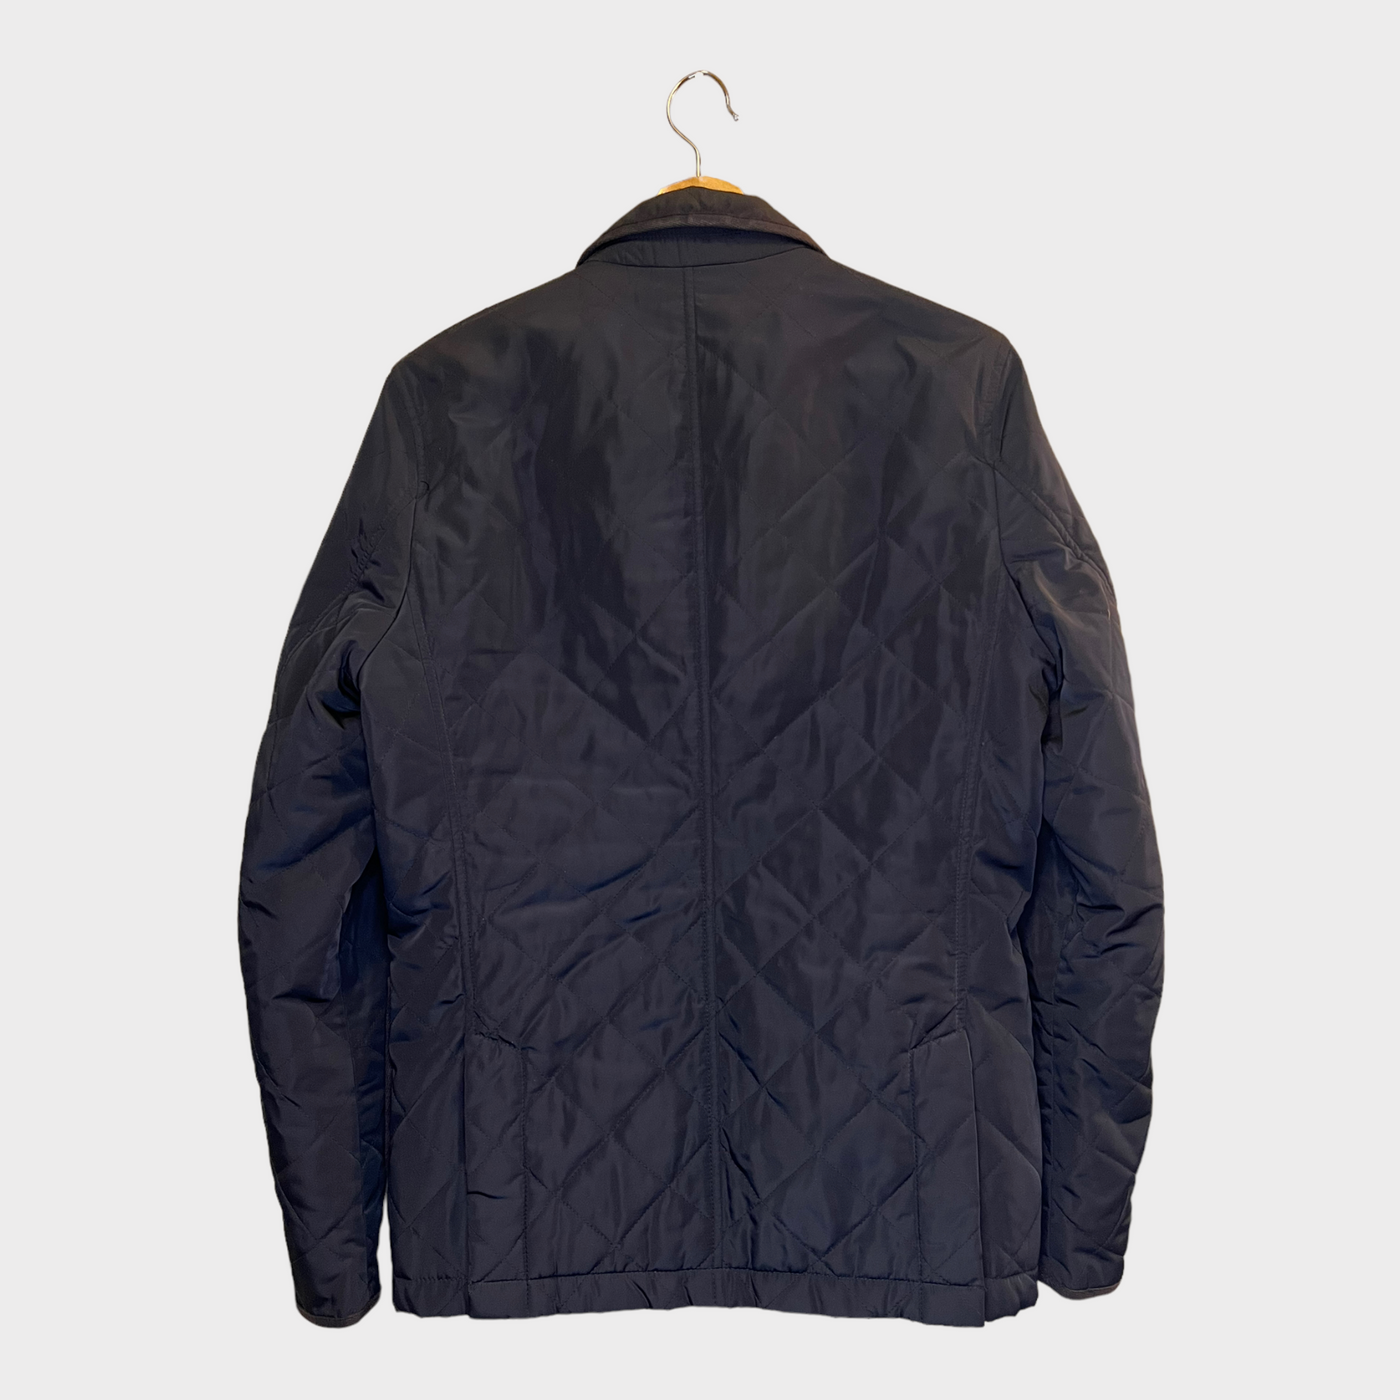 Padded Blazer Jacket from the brand Selected Homme back